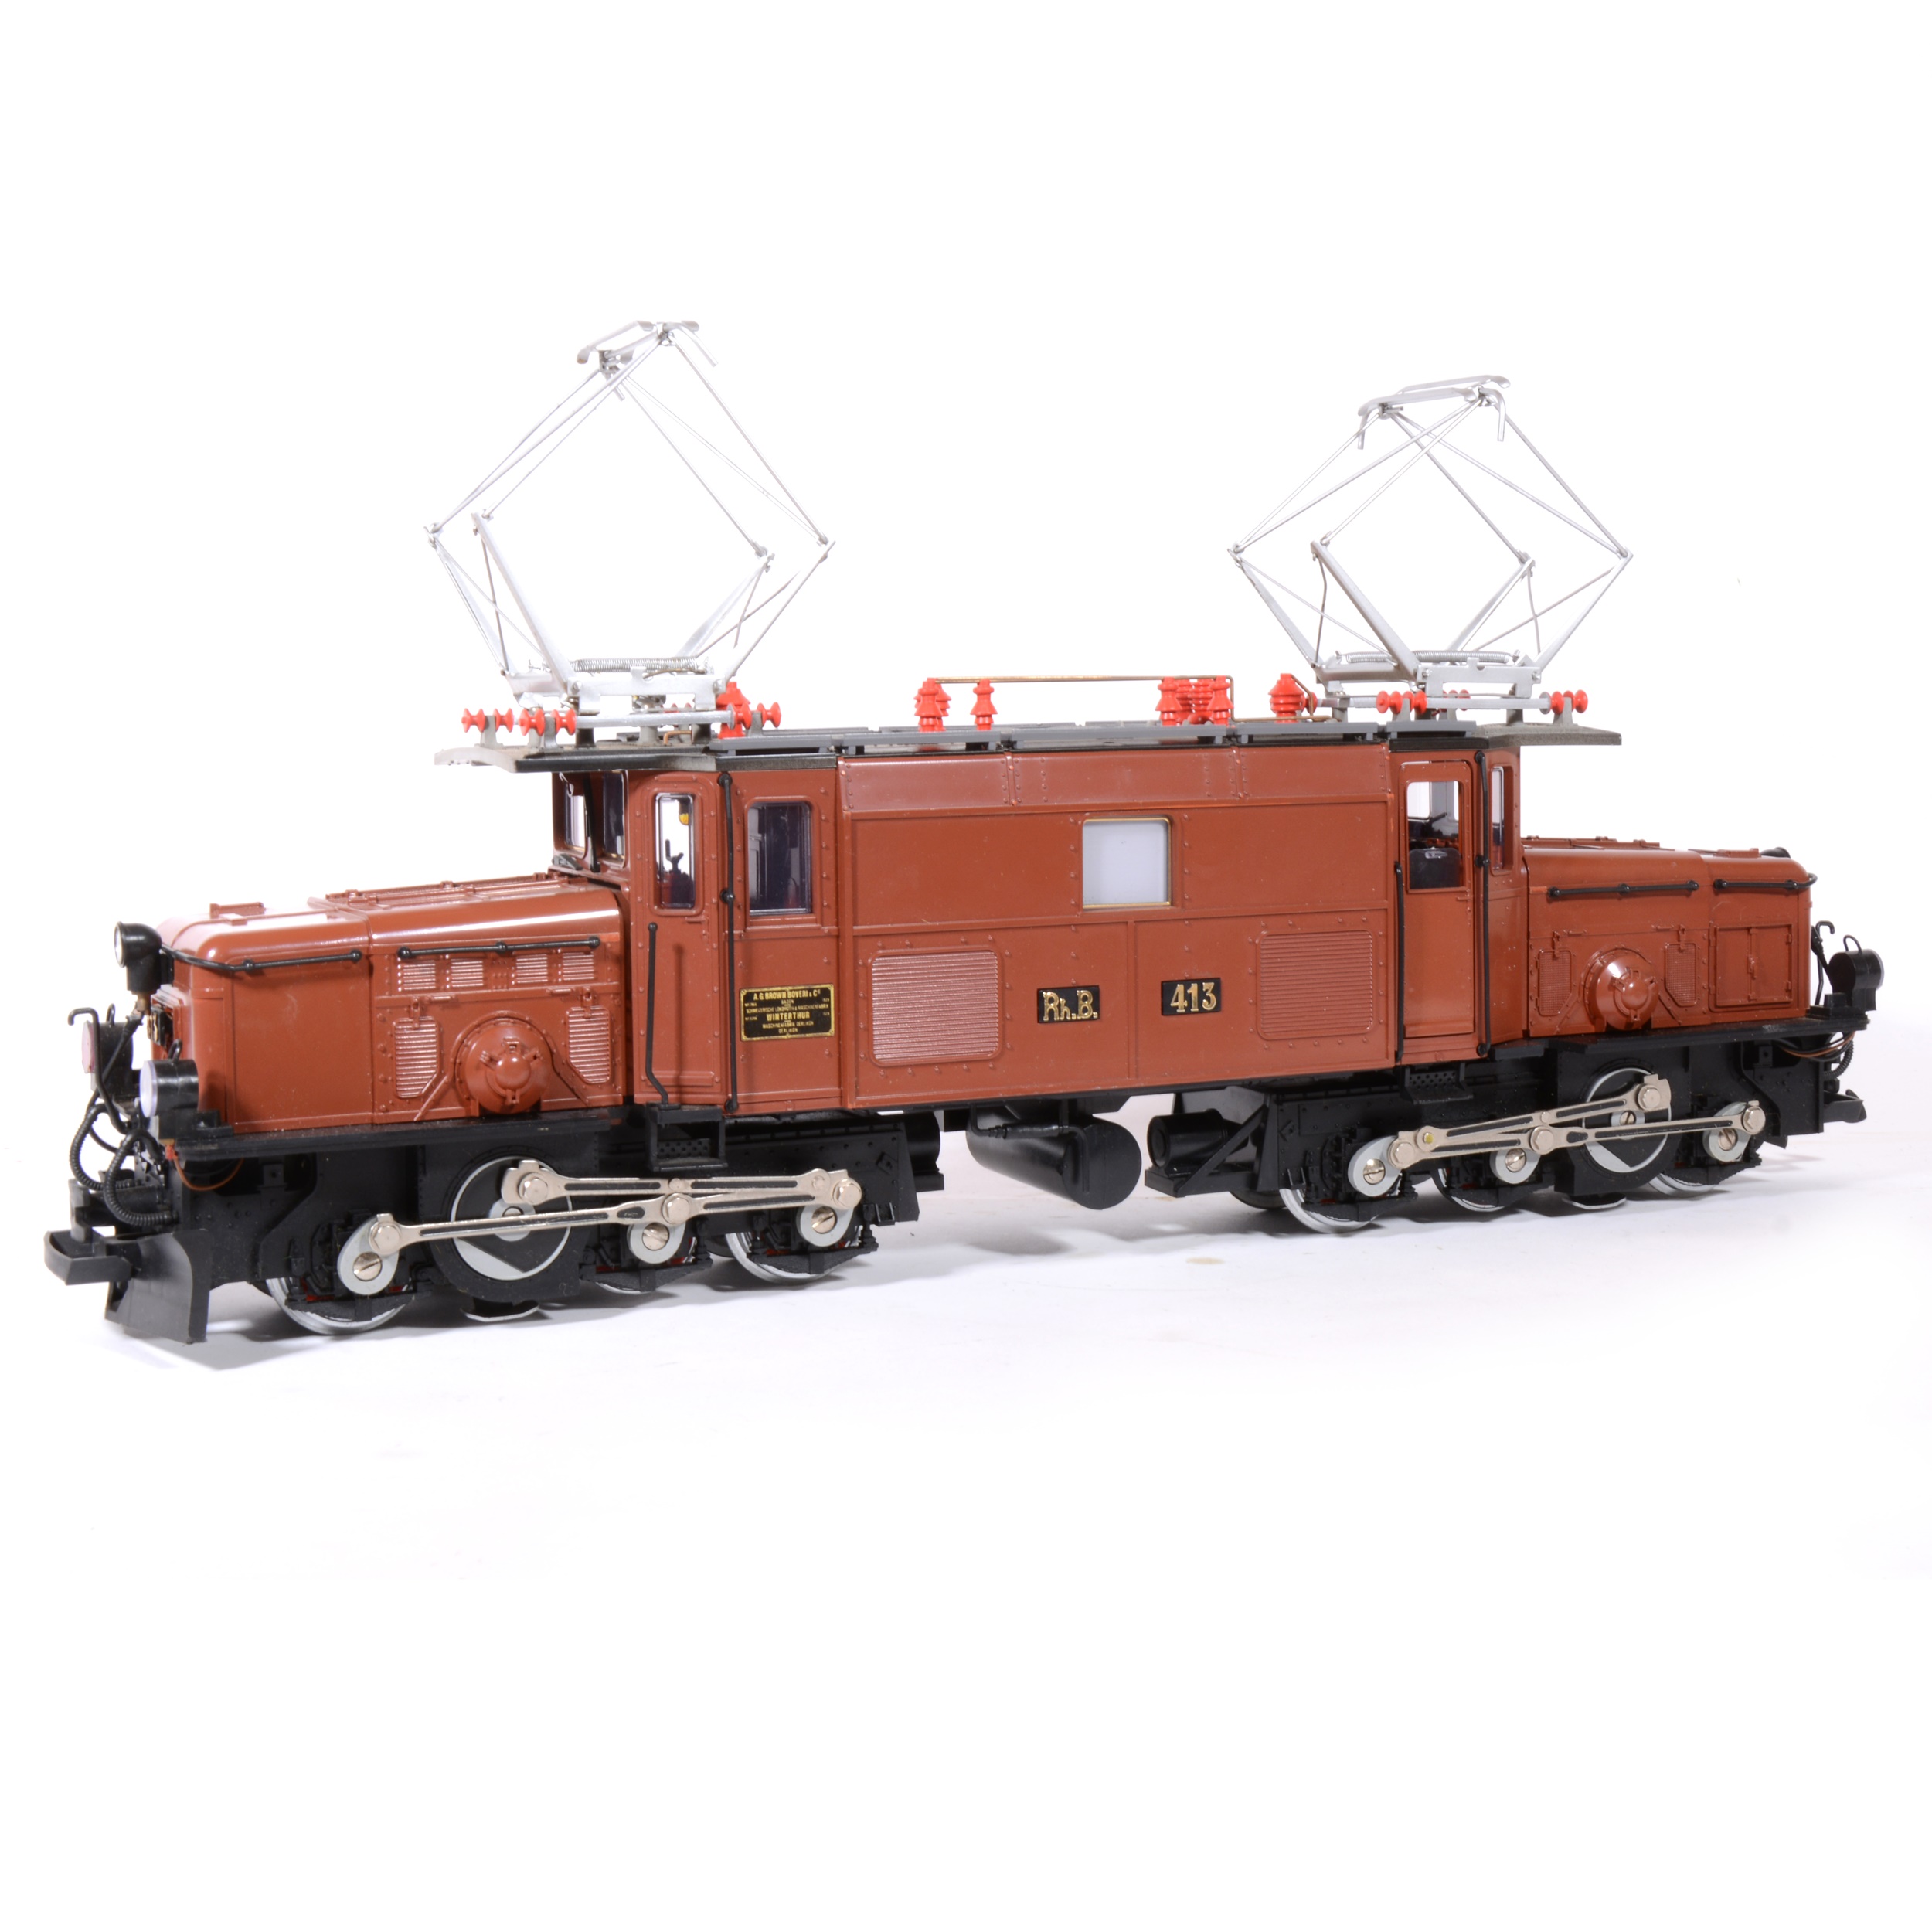 LGB electric, G scale, Crocodile electric locomotive 8-0-8 no.2040, boxed. - Image 2 of 2